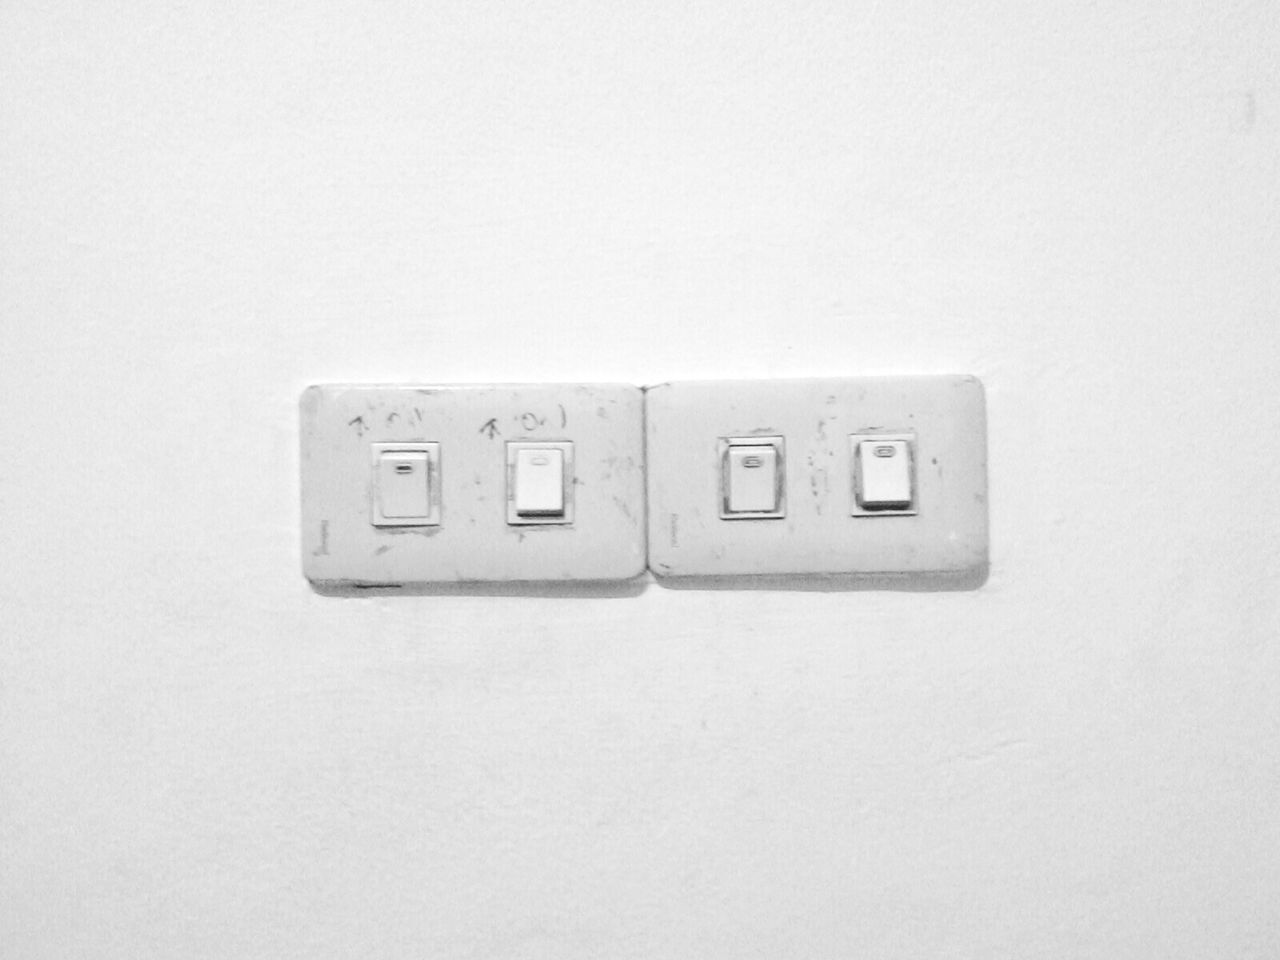 indoors, copy space, studio shot, white background, wall - building feature, communication, close-up, still life, single object, technology, wall, white color, connection, white, no people, number, cut out, simplicity, metal, man made object